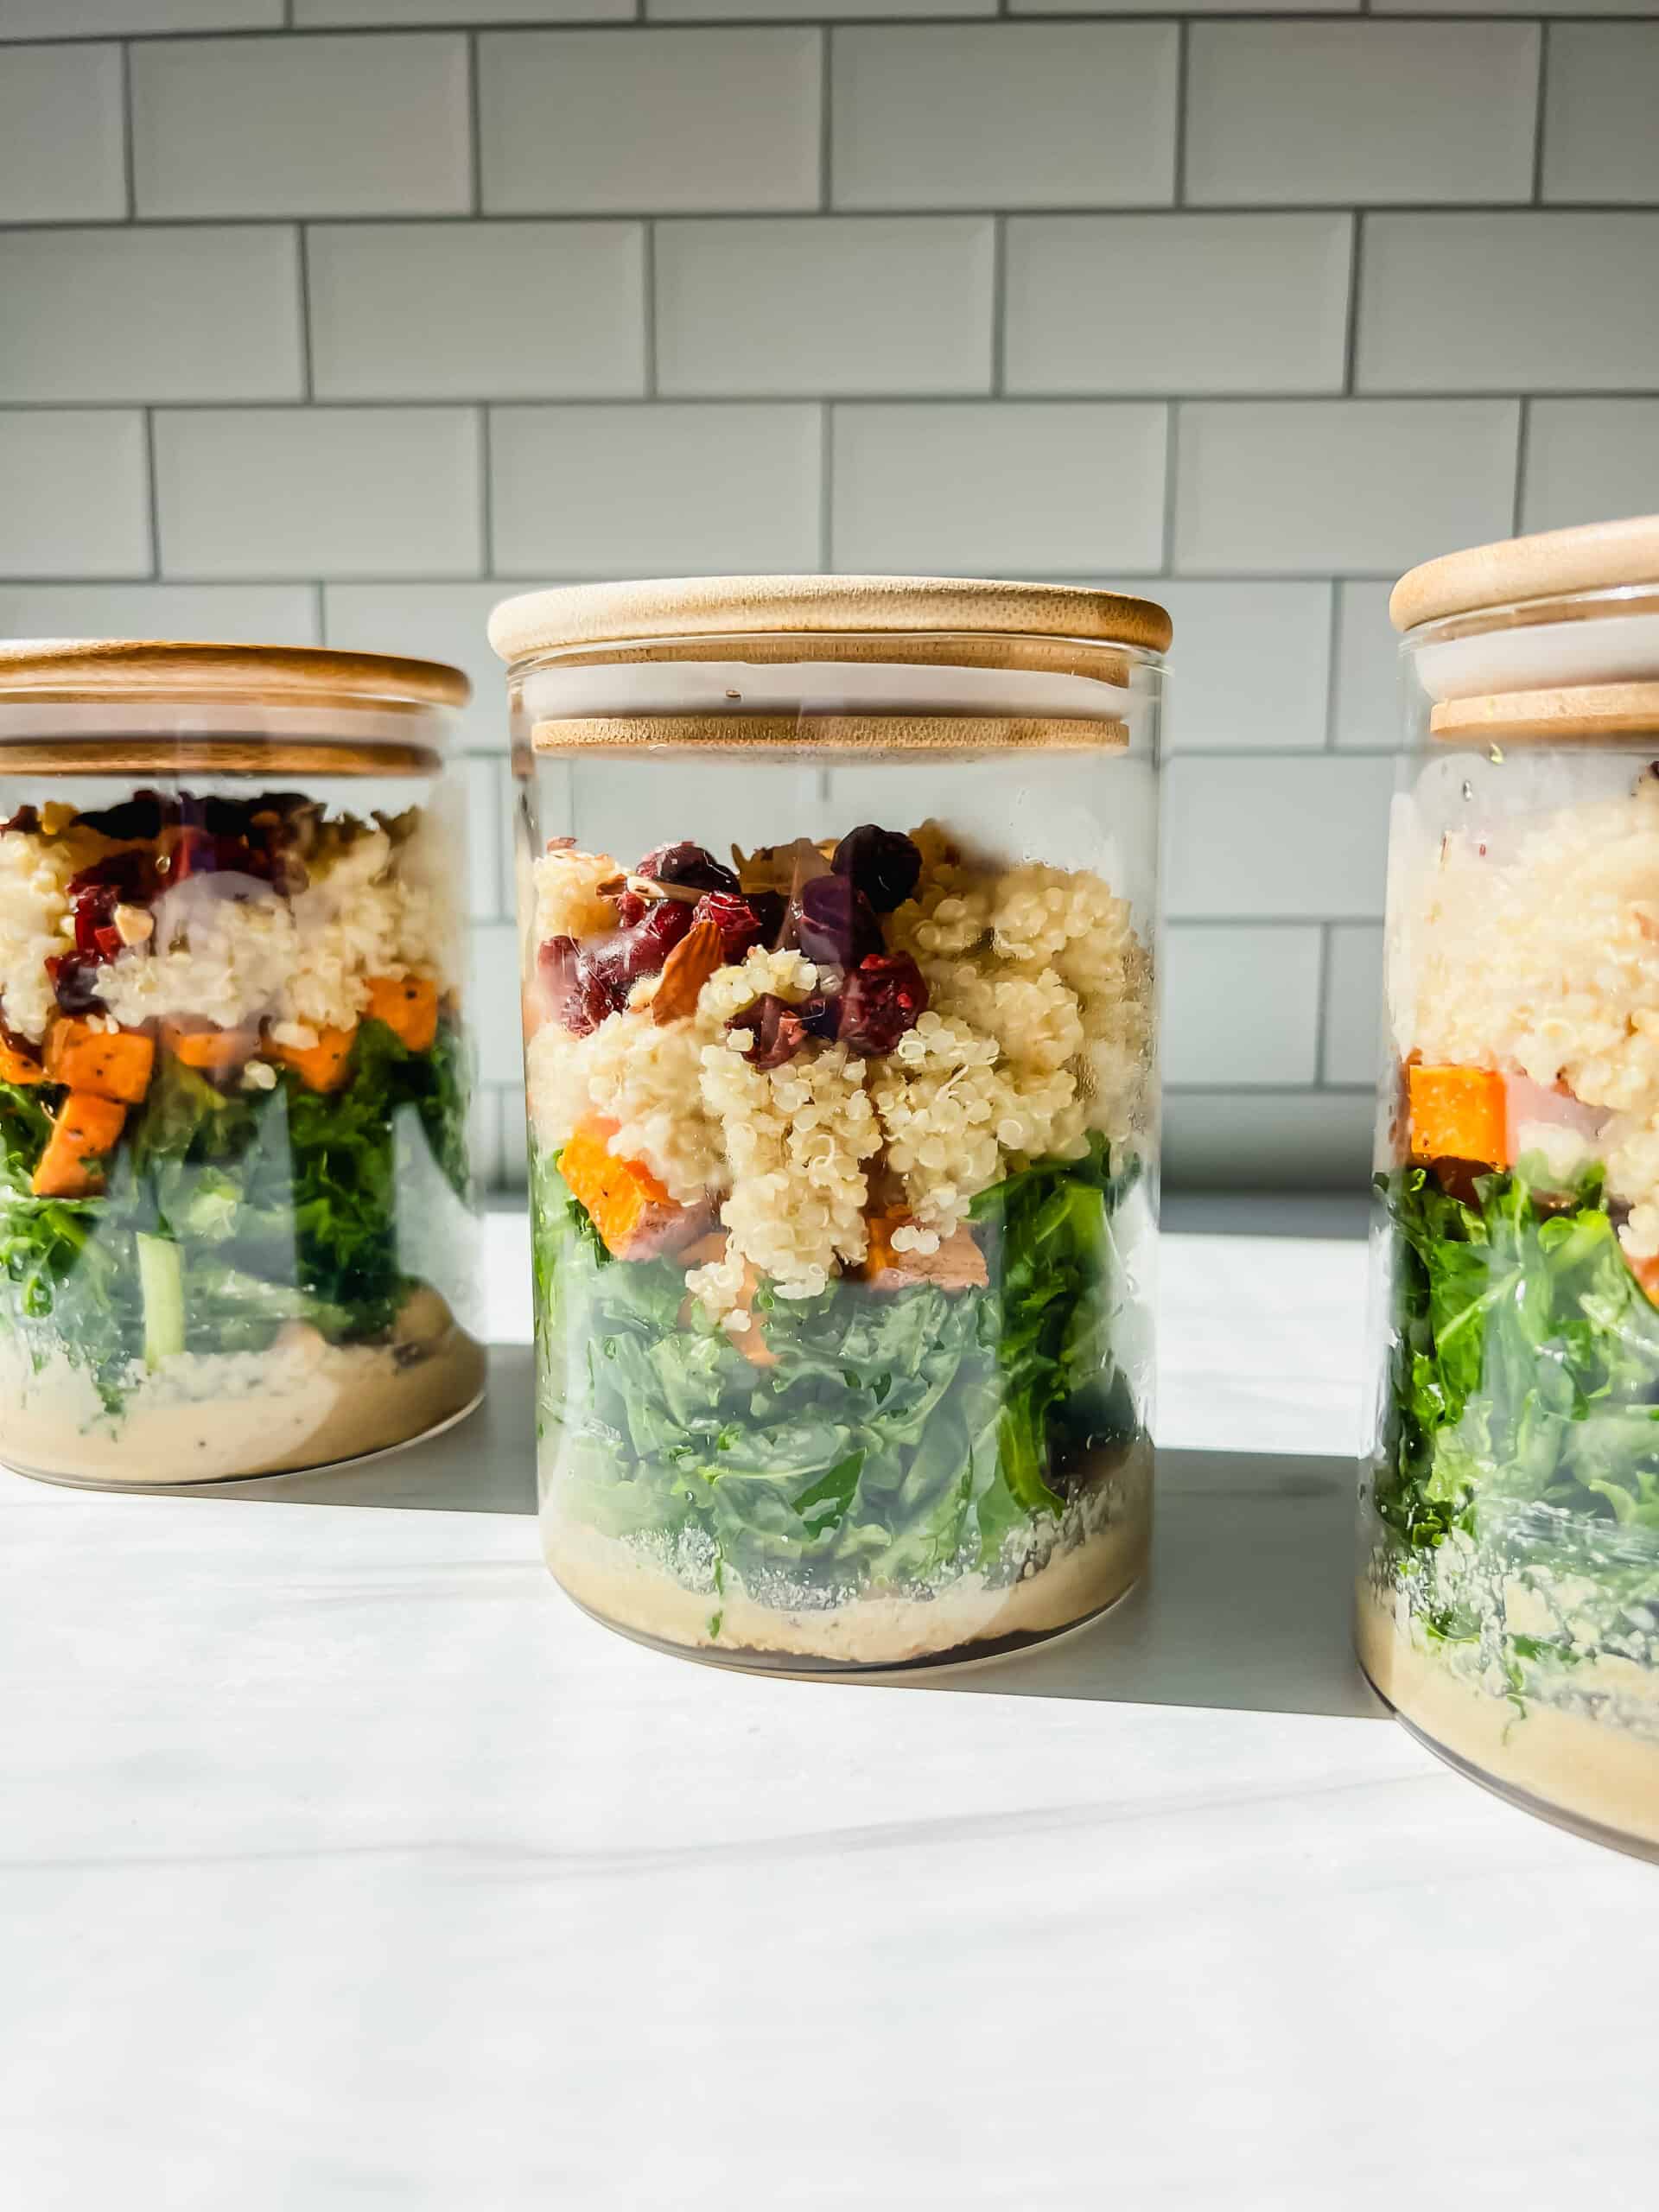 https://easyeatsdietitian.com/wp-content/uploads/2023/10/Meal-Prep-Kale-and-Quinoa-Salad-Jars-2-scaled.jpg